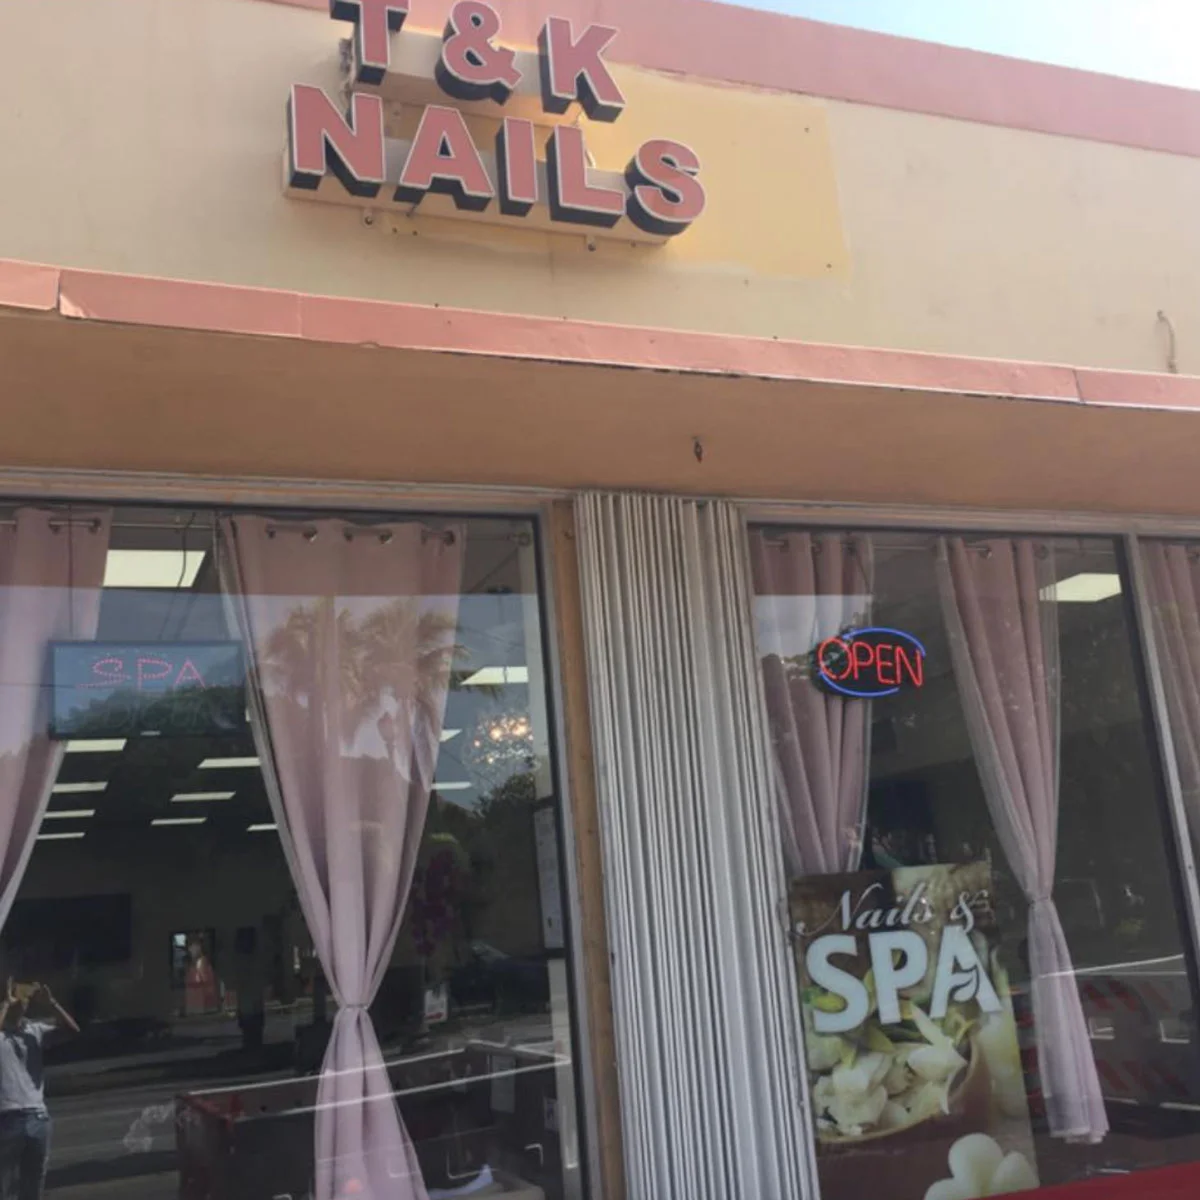 Exterior windows of T&K nails in Coconut Grove with an Open sign hanging up